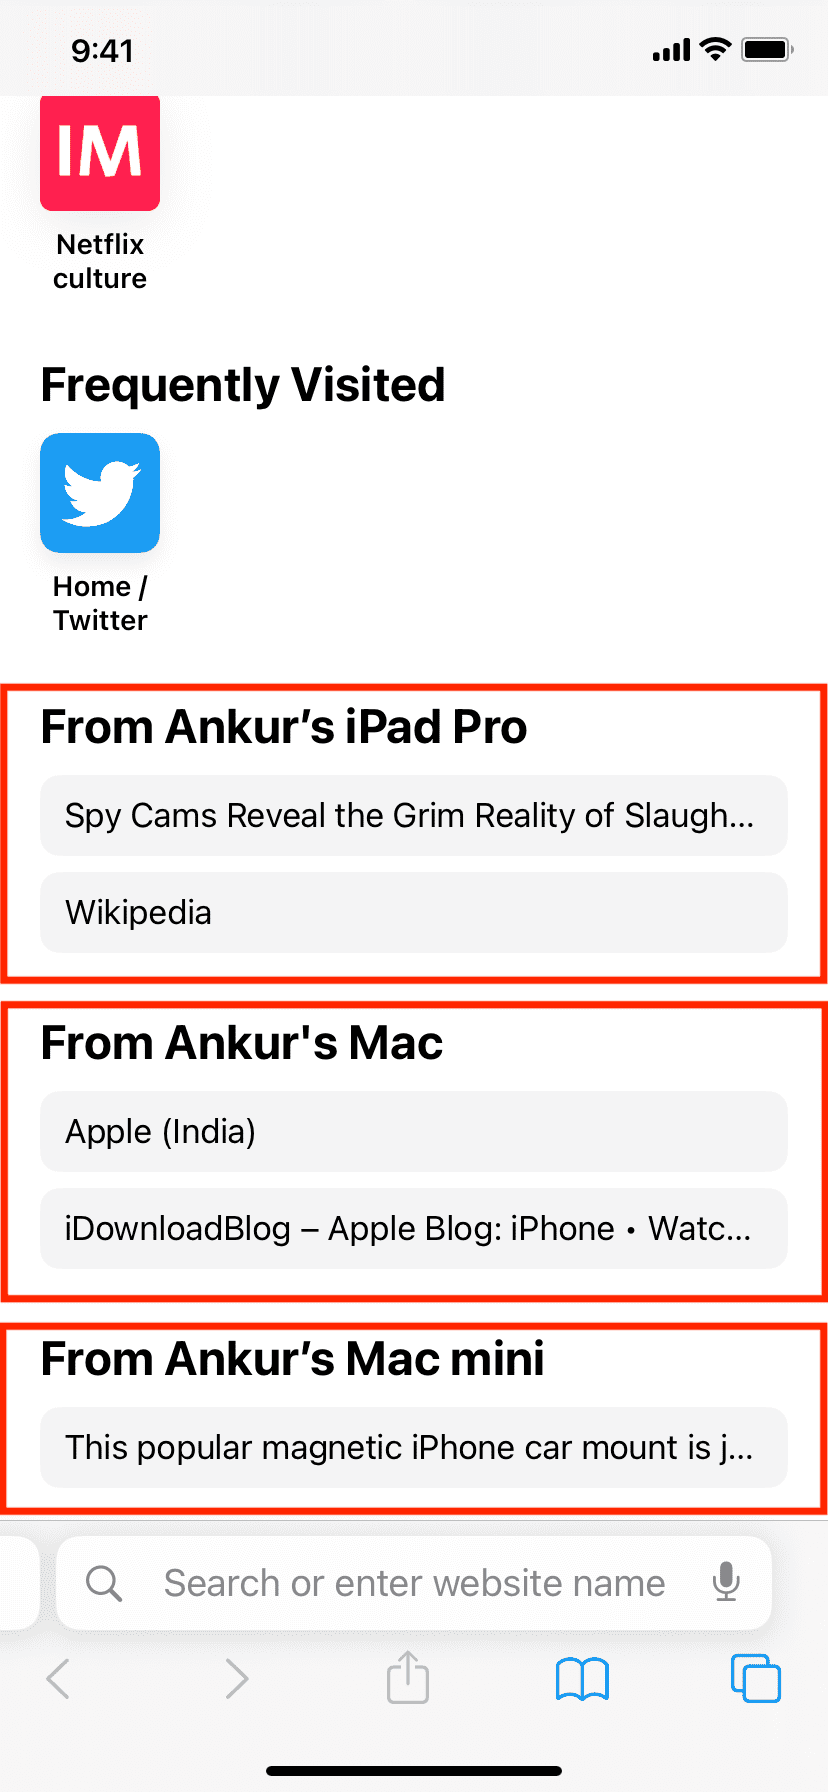 iCloud Tabs from other devices in Safari on iPhone